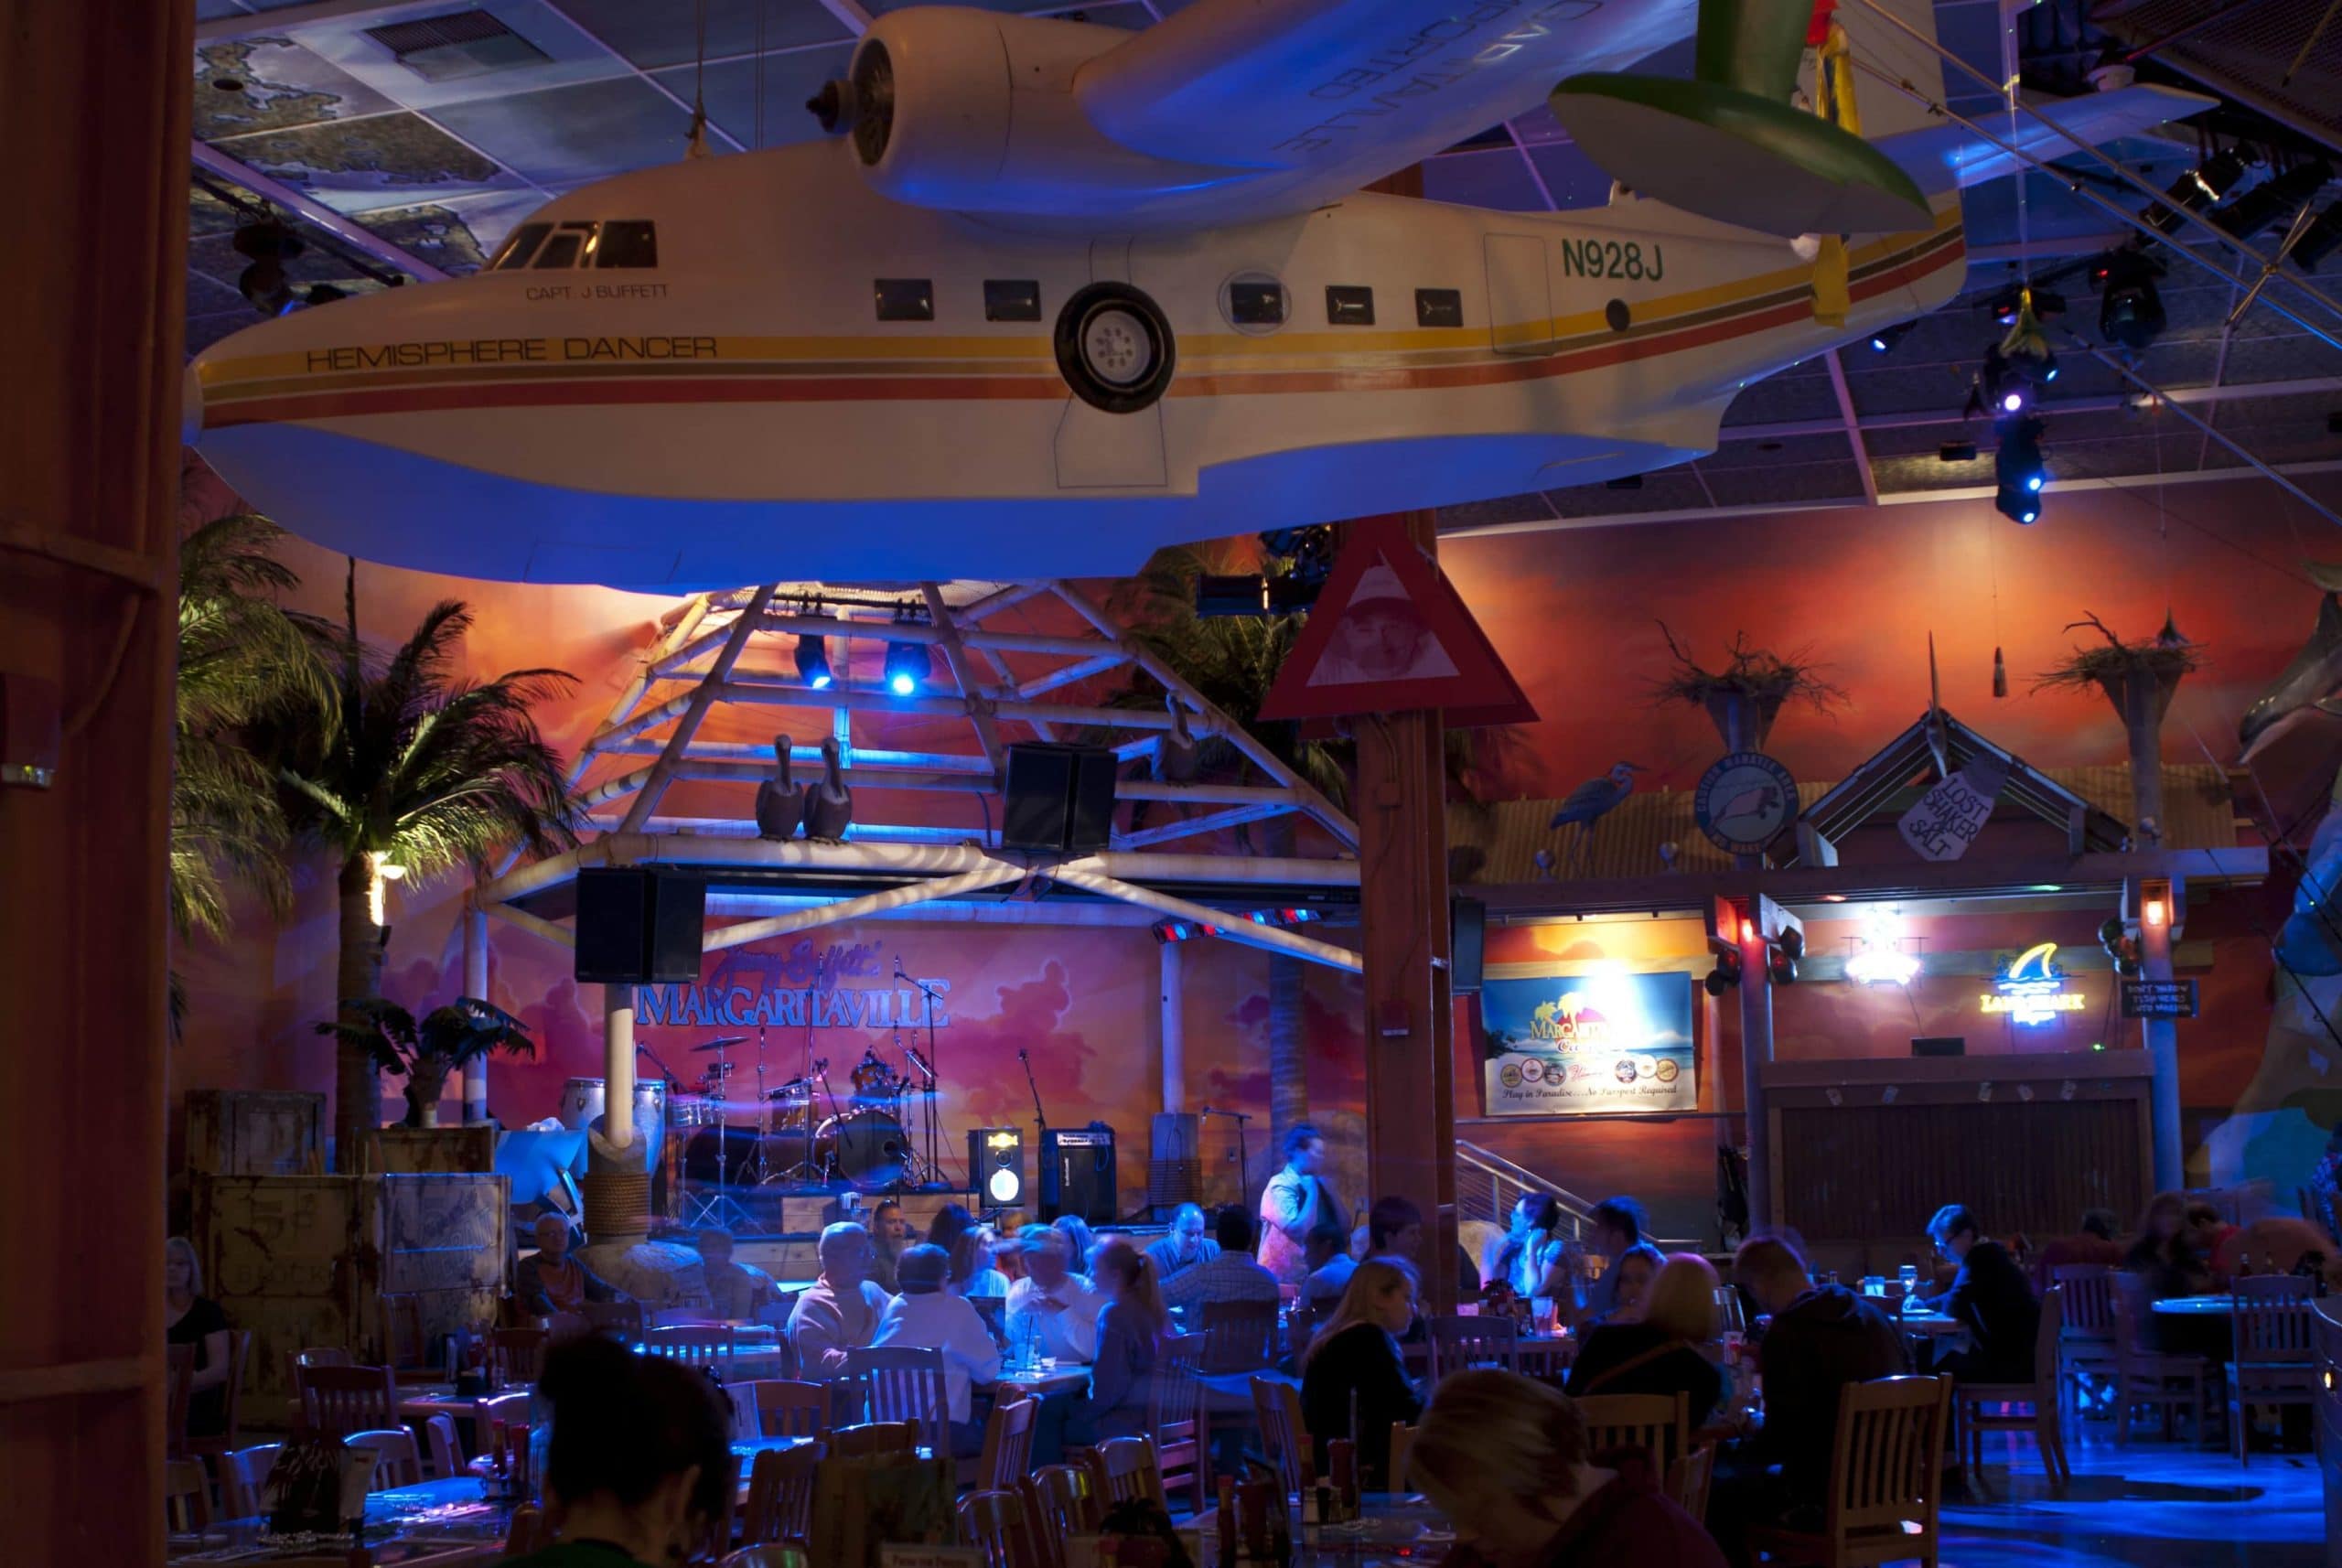 Volcano-Looking-at-Stage-In-Margaritaville-Created-By-Crunchy-Tech-In-Orlando-Florida